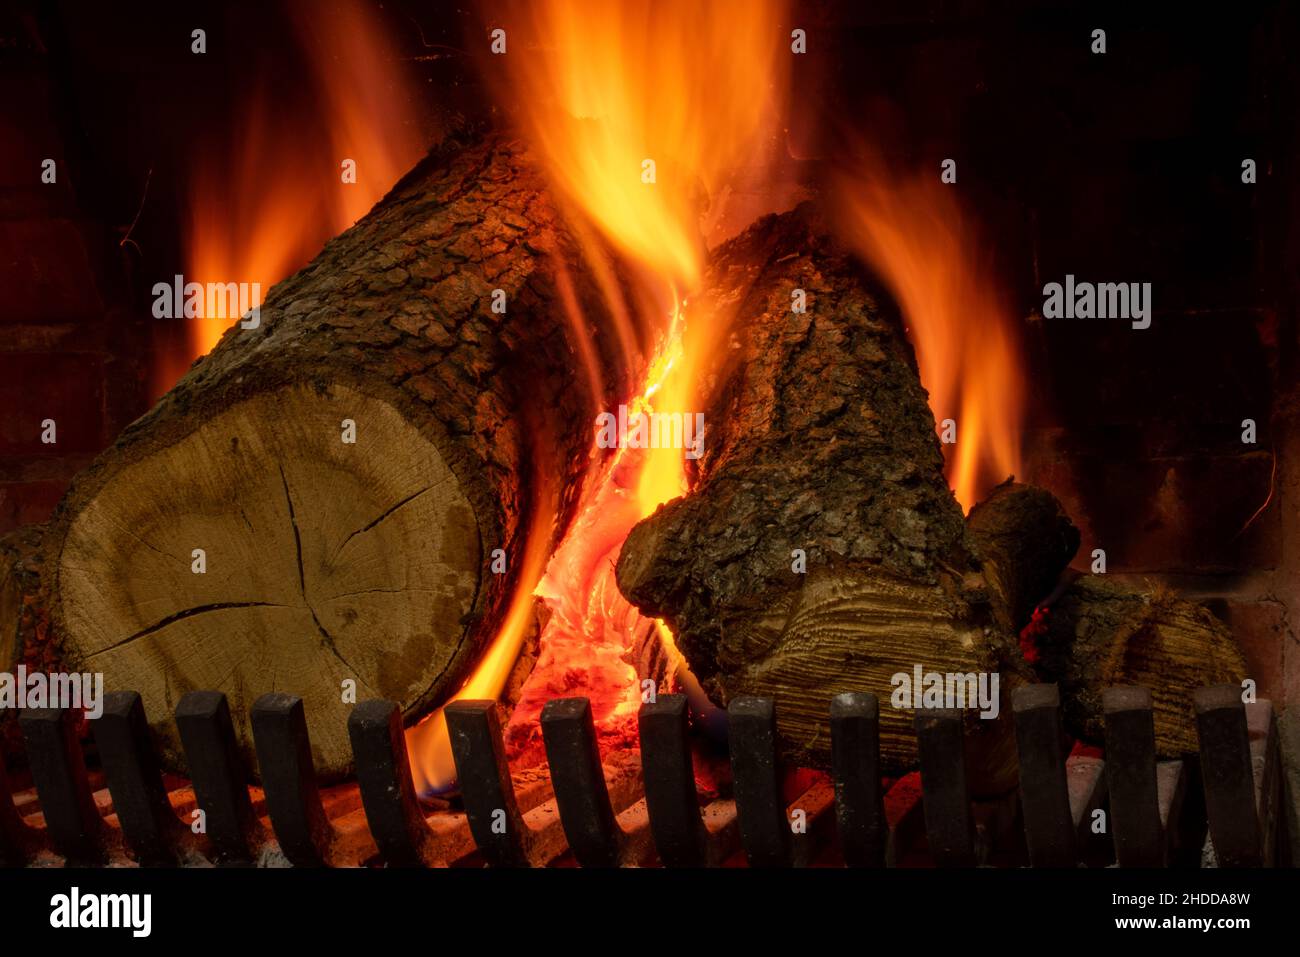 Burning logs inside the fireplace, giving warm atmosphere and coziness. Stock Photo